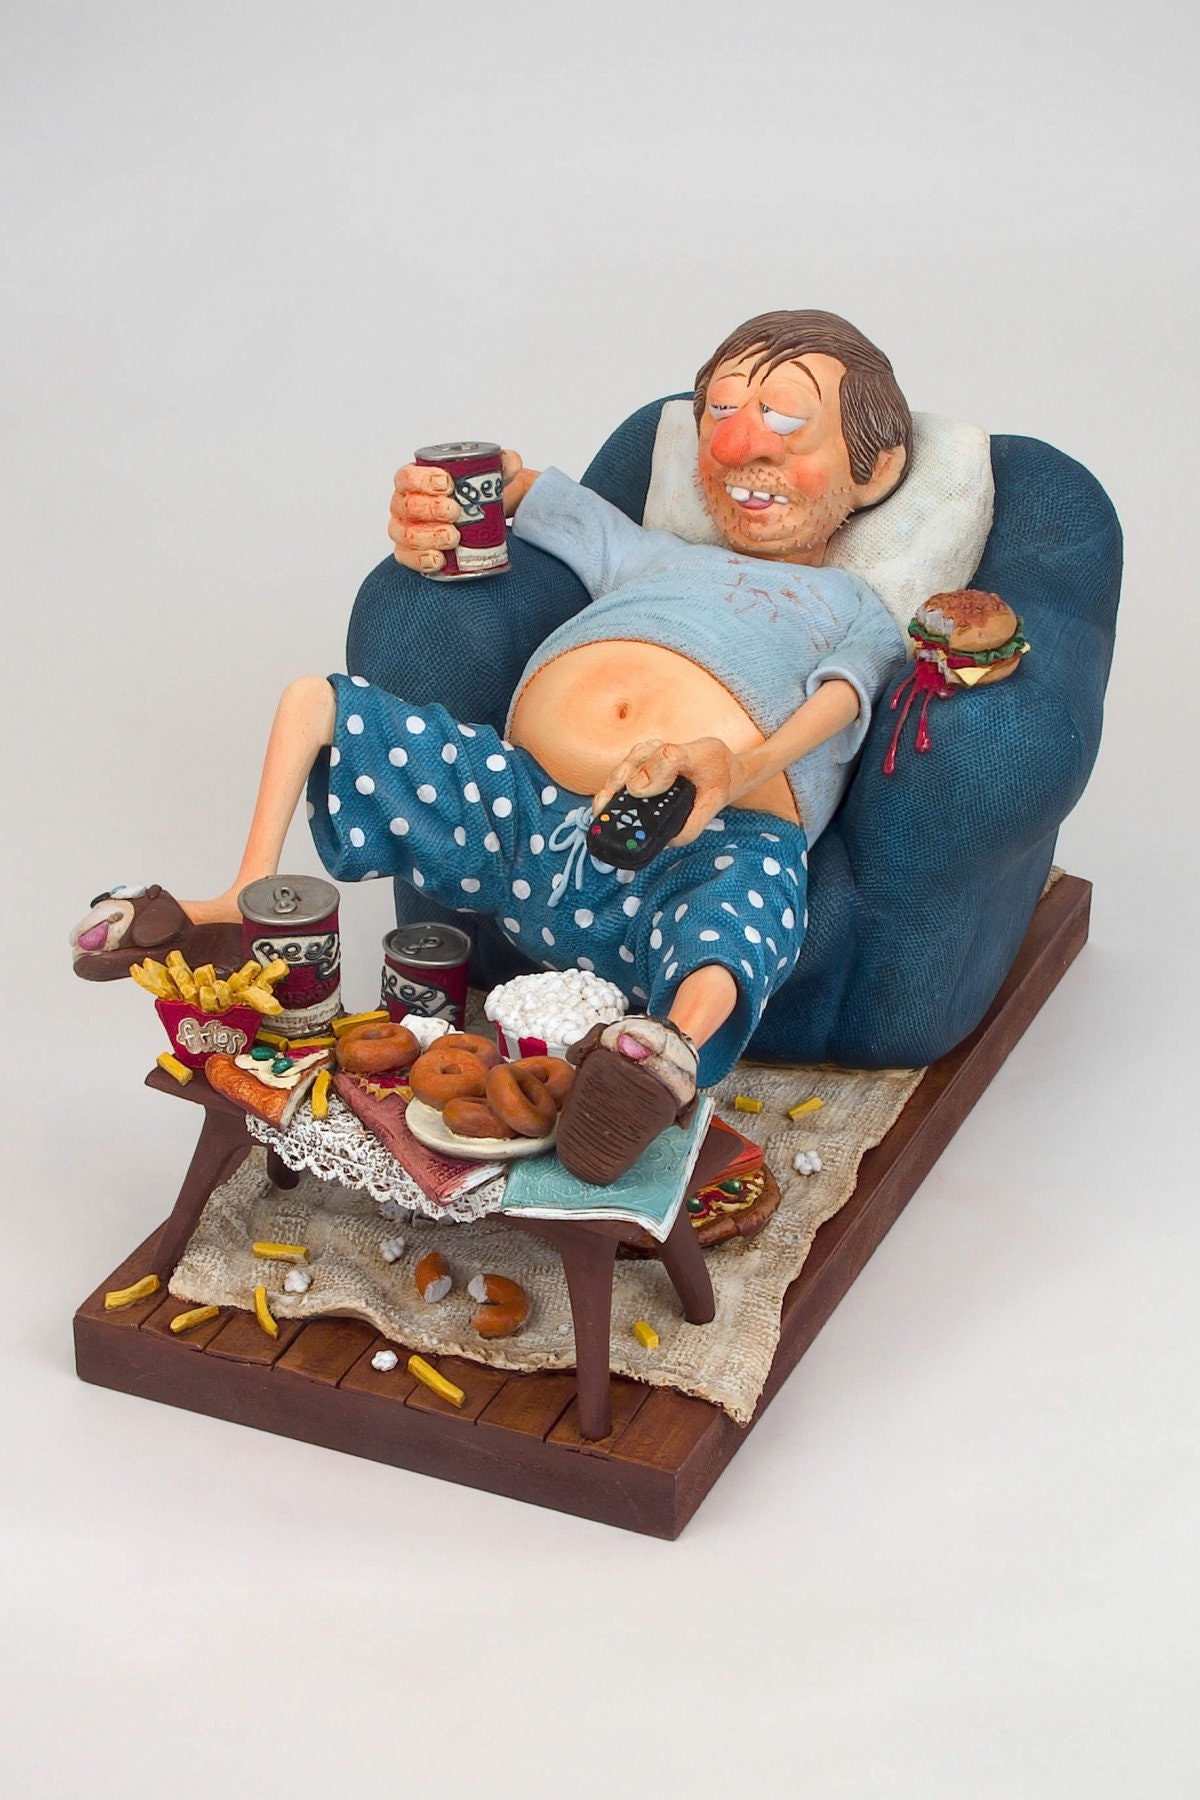 The Couch Potato Figurine, Hand-painted, TV & Movie Lovers\' Art, Unique  Humorous Decor, Perfect Gift, Relaxing Scene, Collectible - Etsy